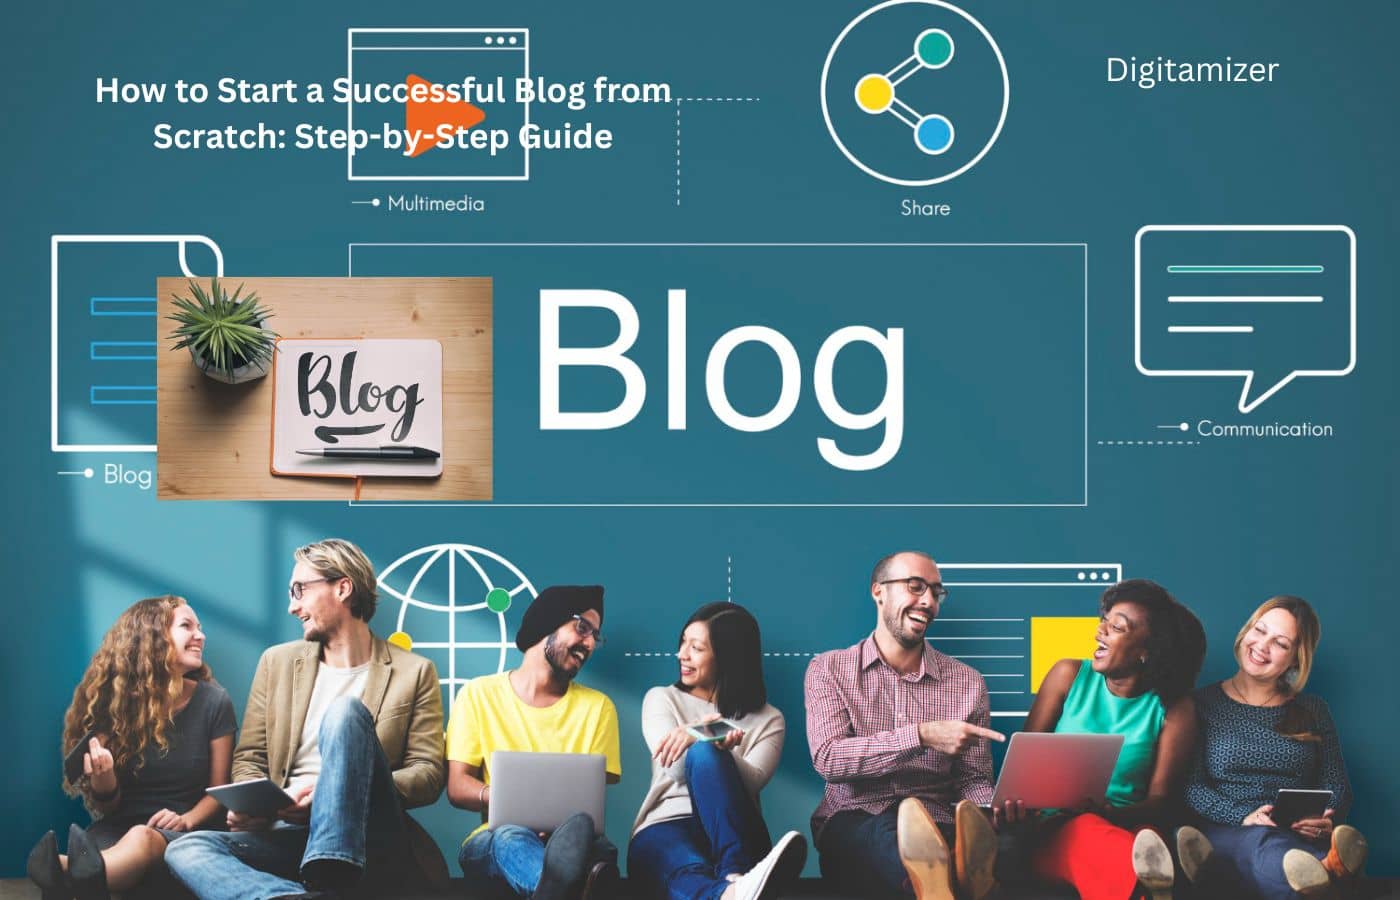 How to Start a Successful Blog from Scratch Step-by-Step Guide